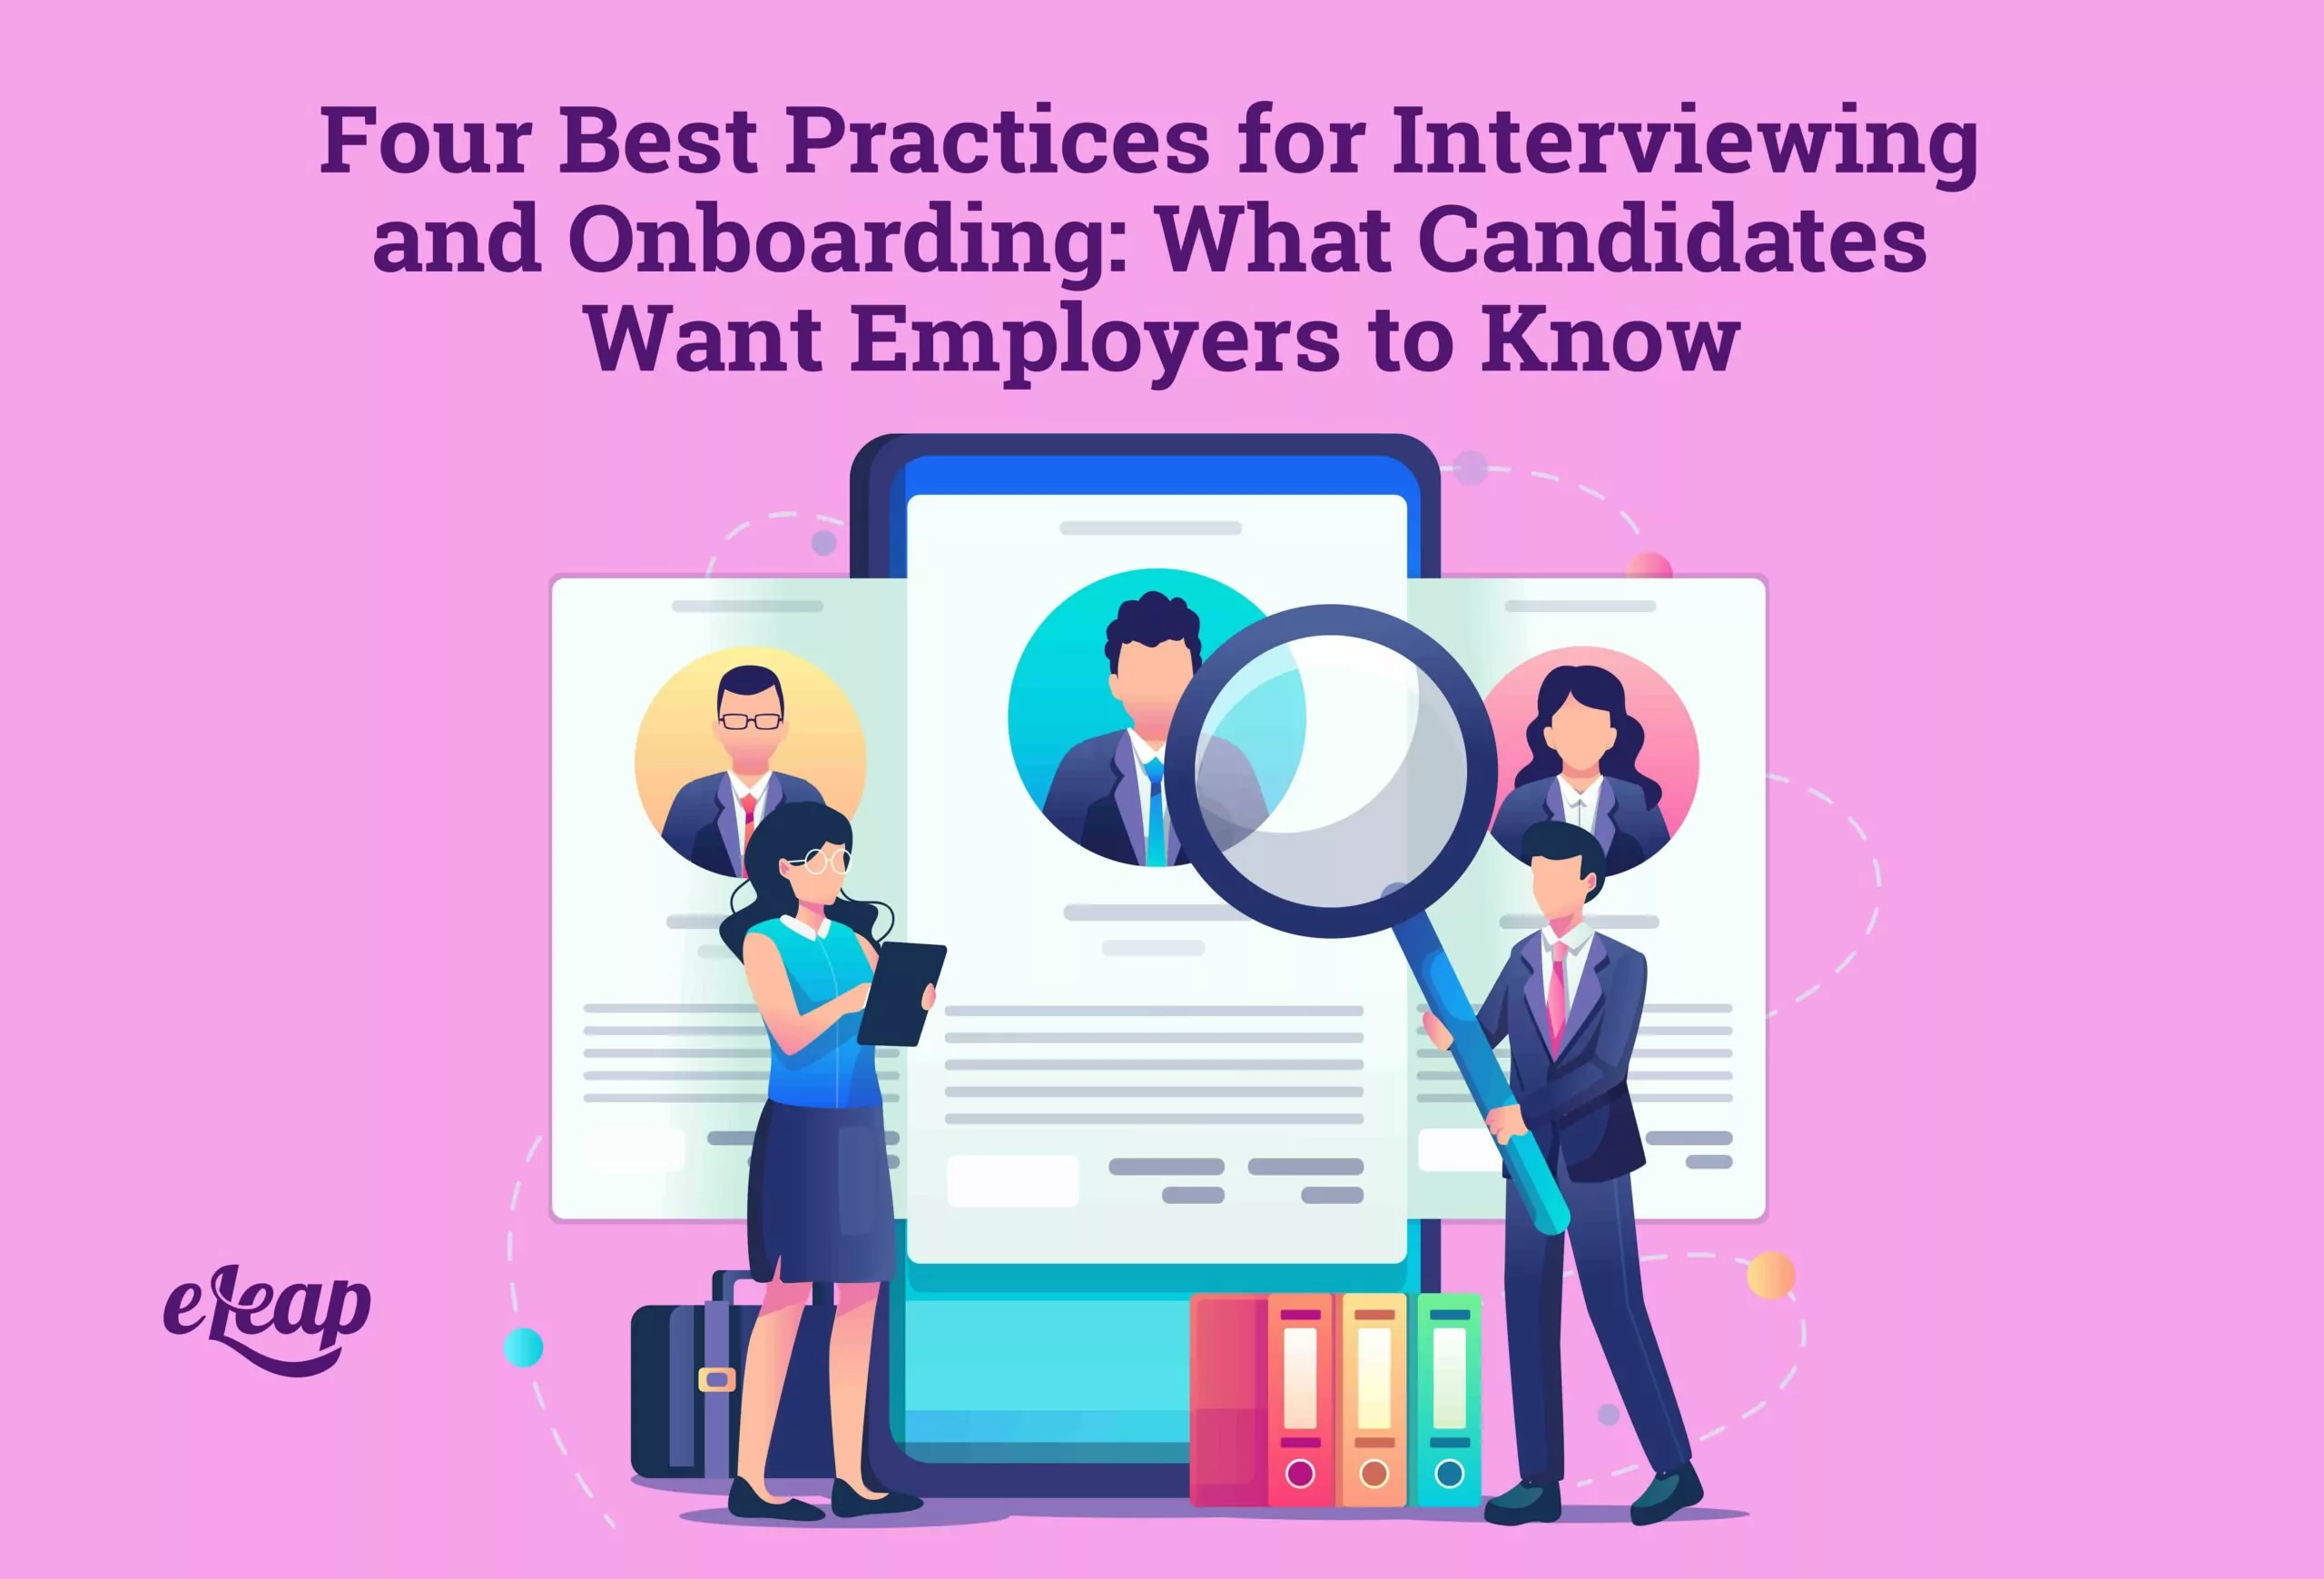 Four Best Practices for Interviewing and Onboarding: What Candidates Want Employers to Know